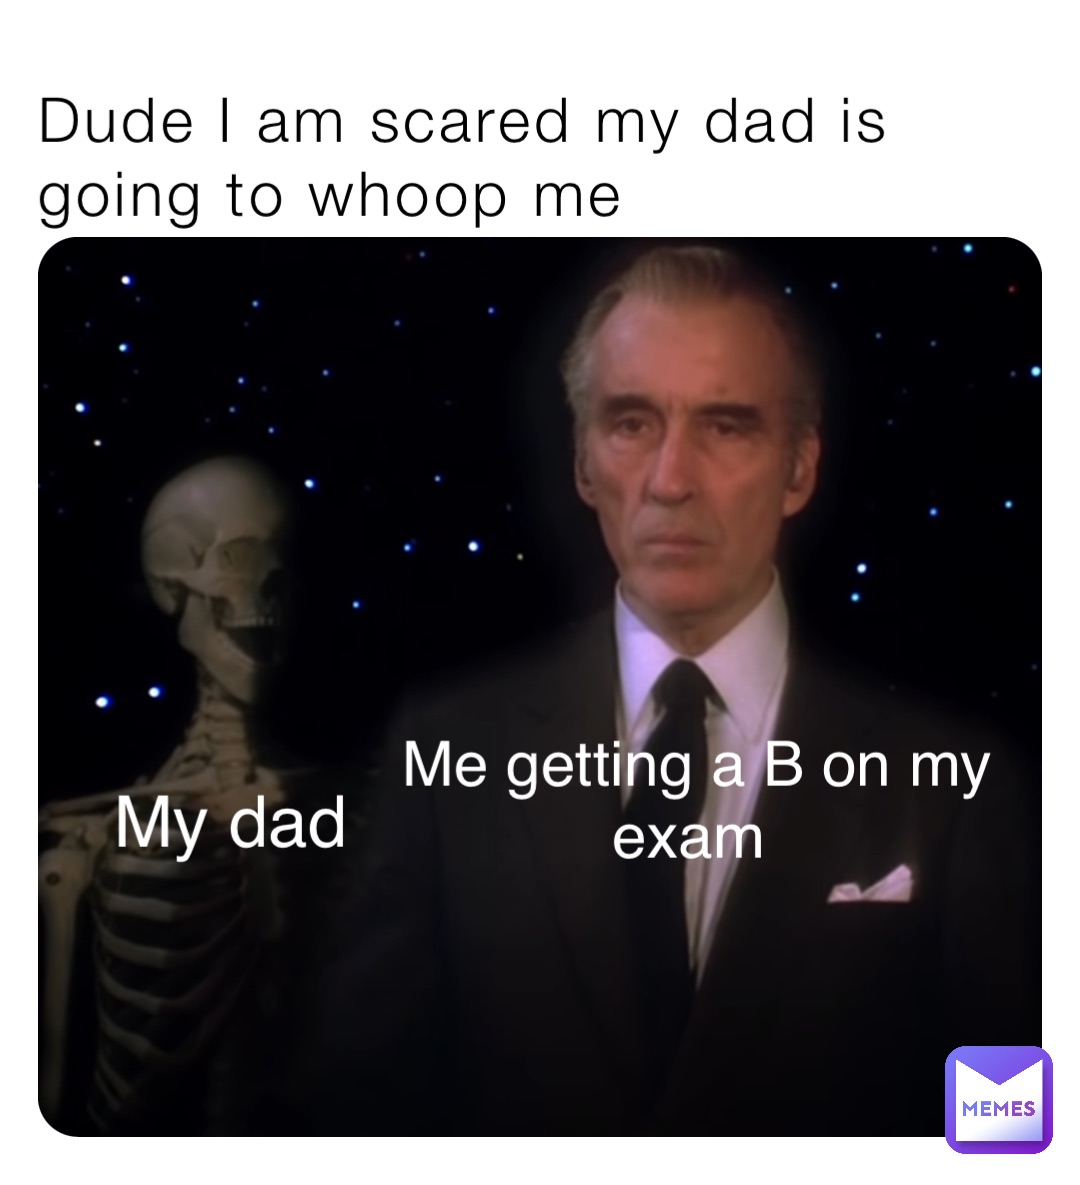 Dude I am scared my dad is going to whoop me Me getting a B on my exam My dad